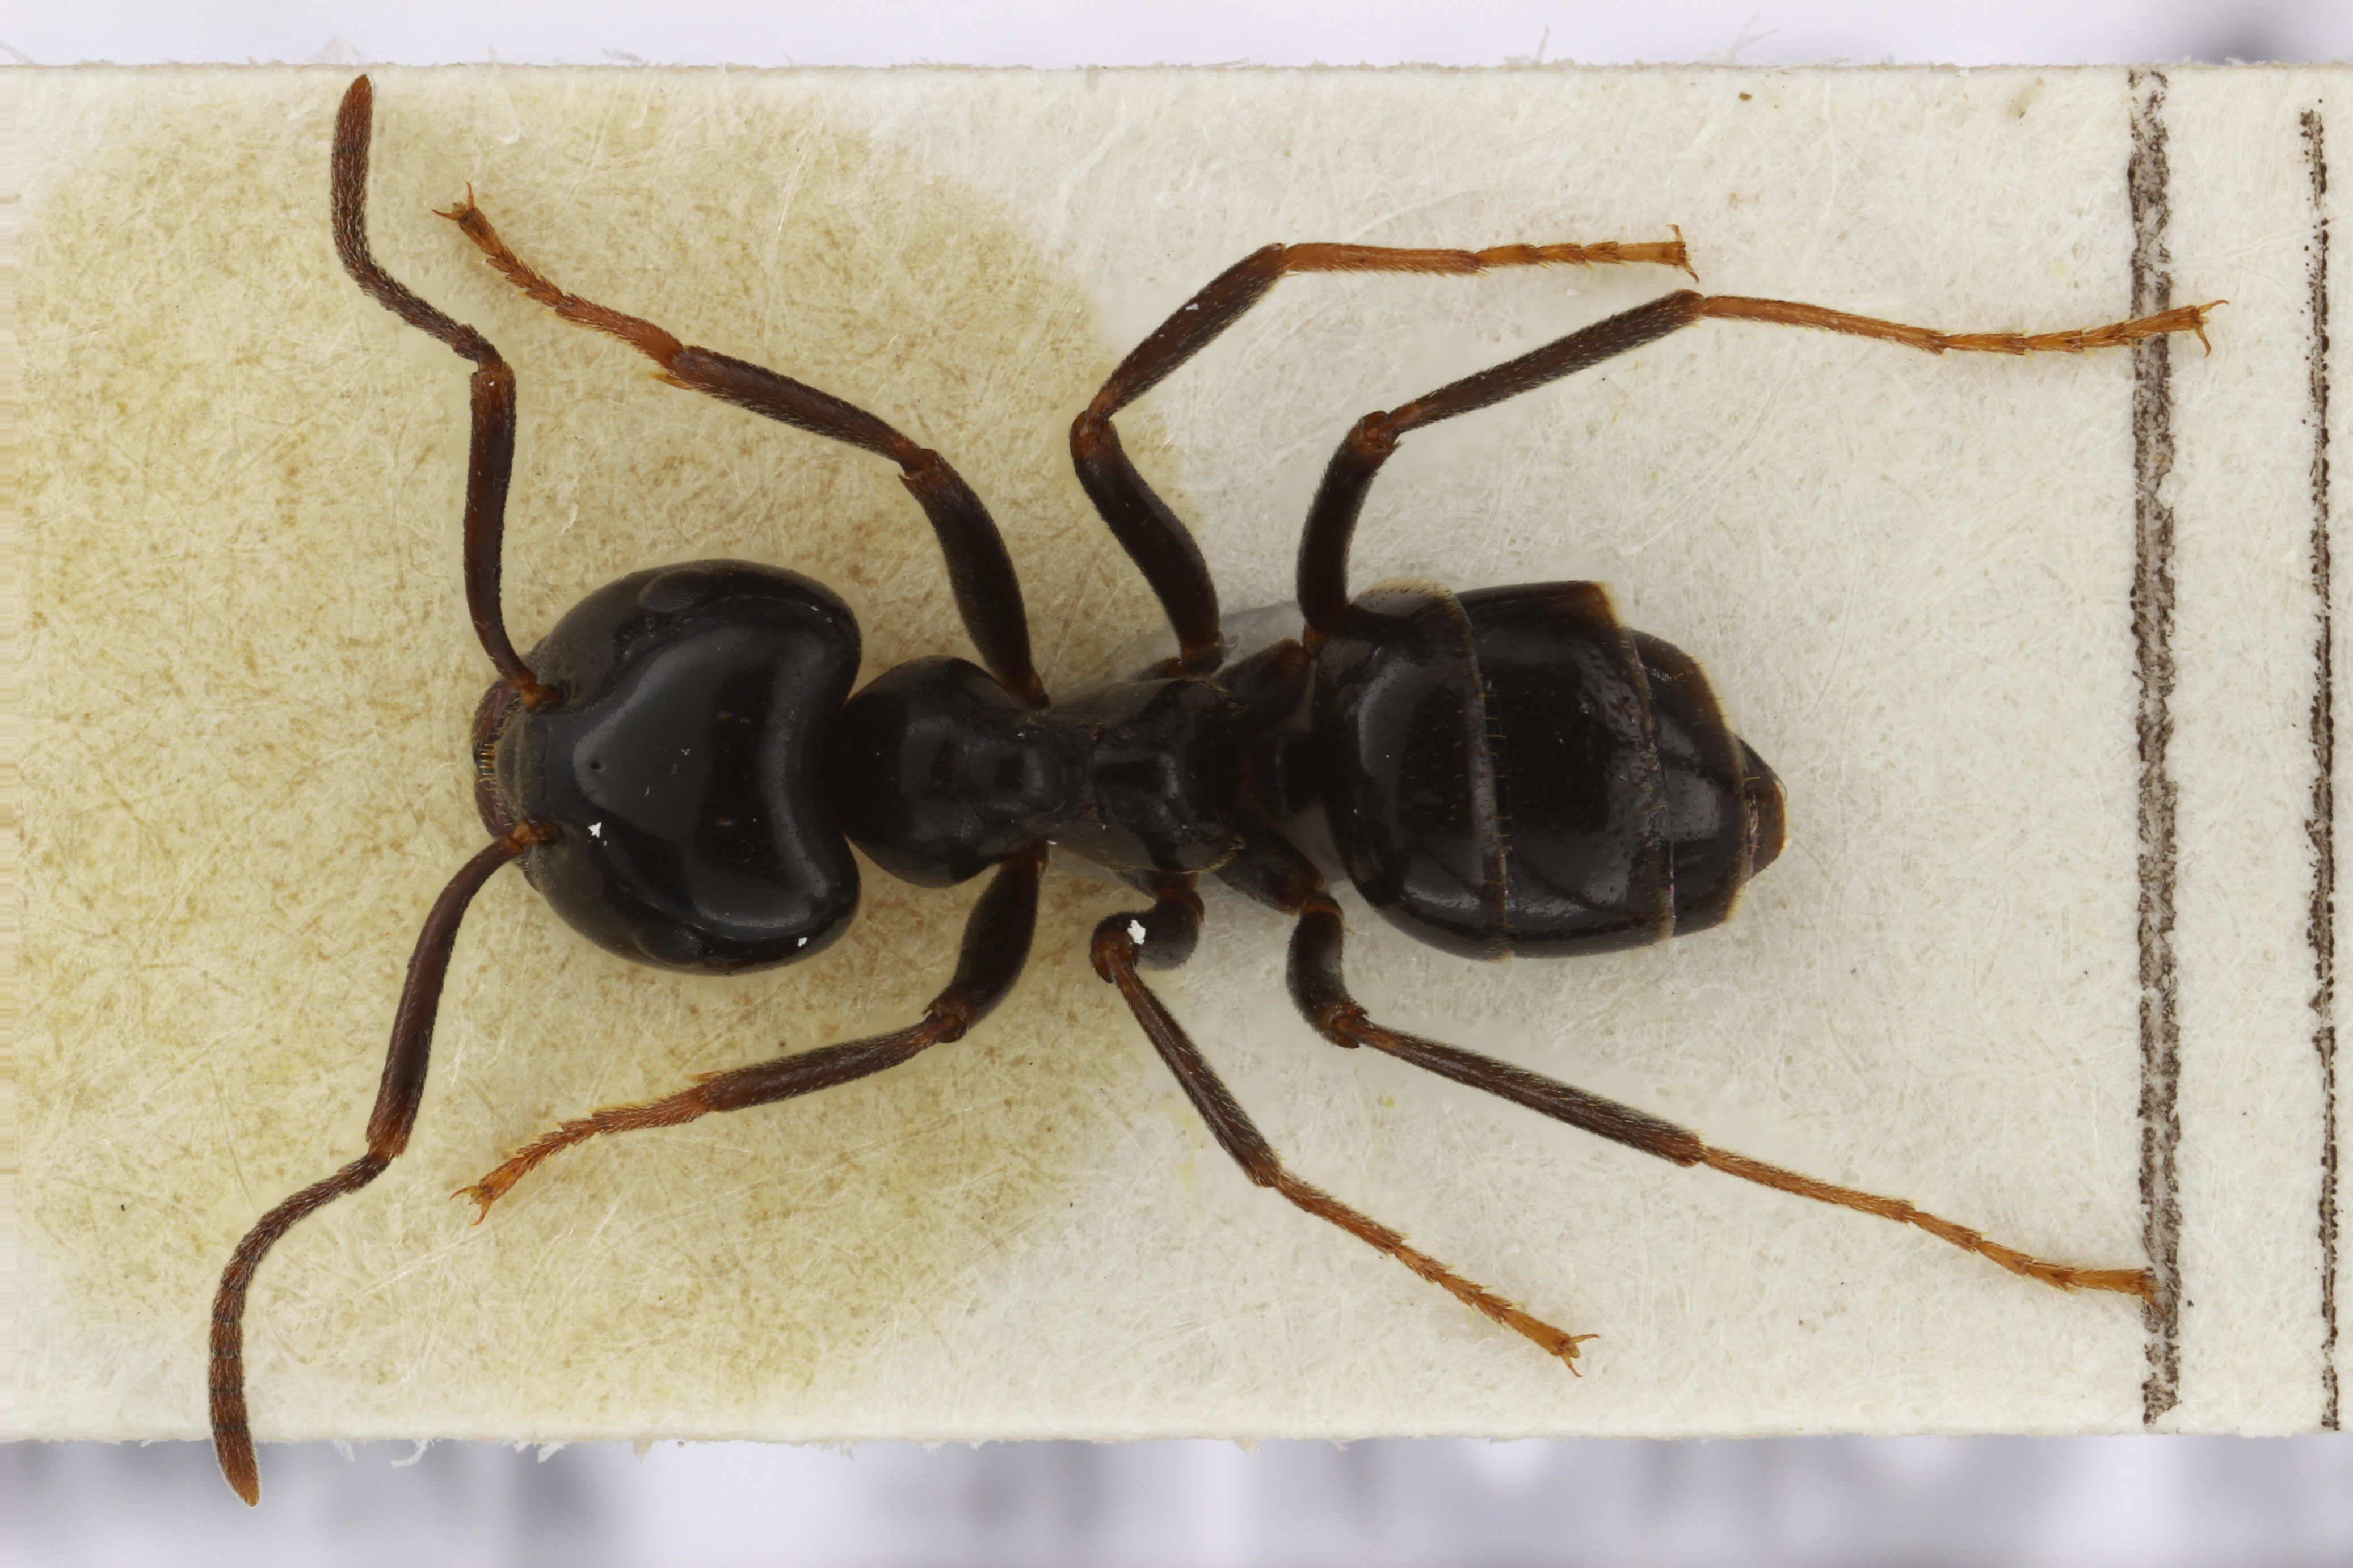 Large Ant 2 Dorsal View